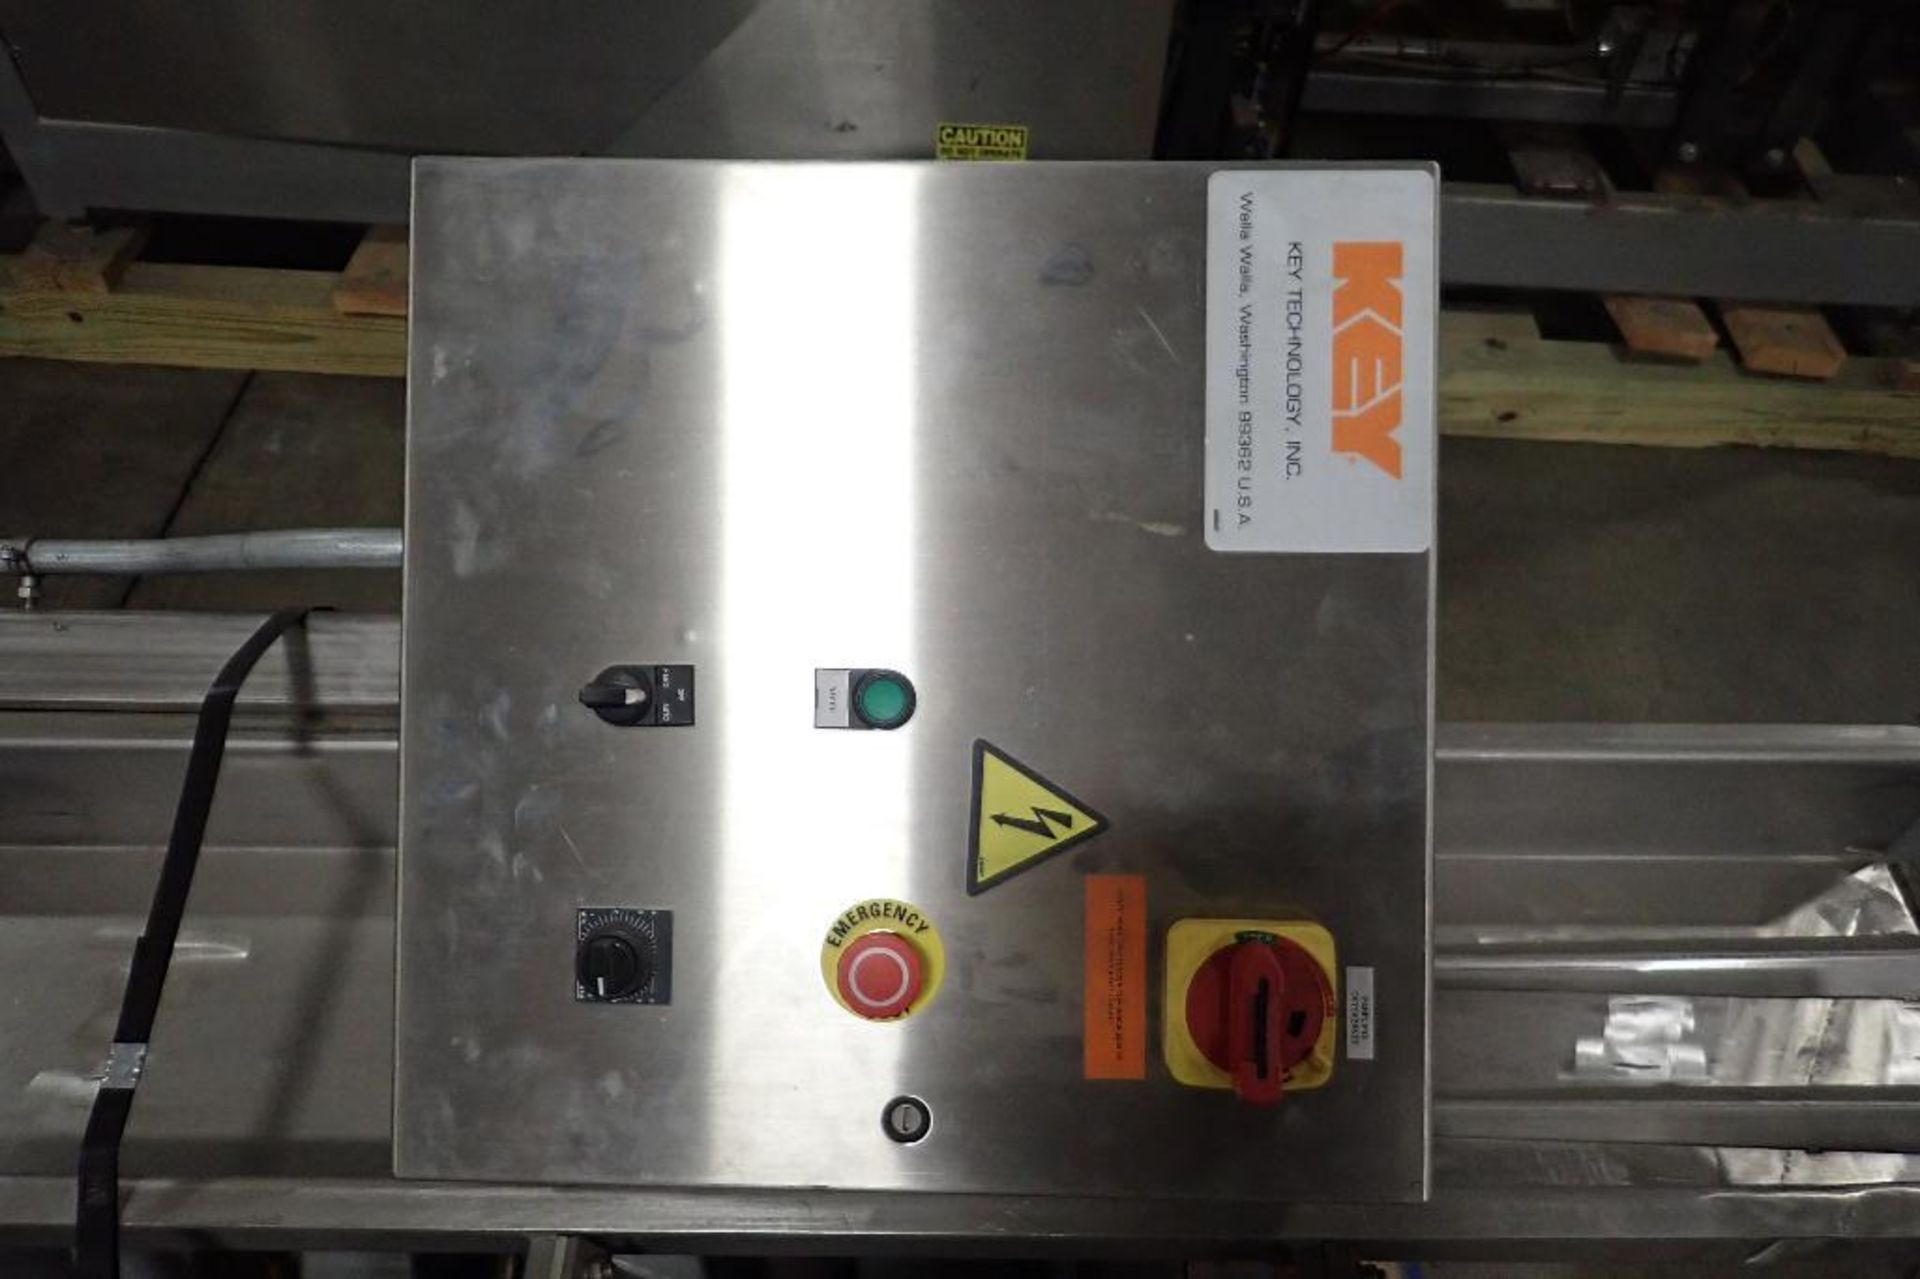 Key iso flow vibratory alignment conveyor, Model 433419-1, SN 05-126157-4, SS bed 68 in. long x 12 i - Image 7 of 10